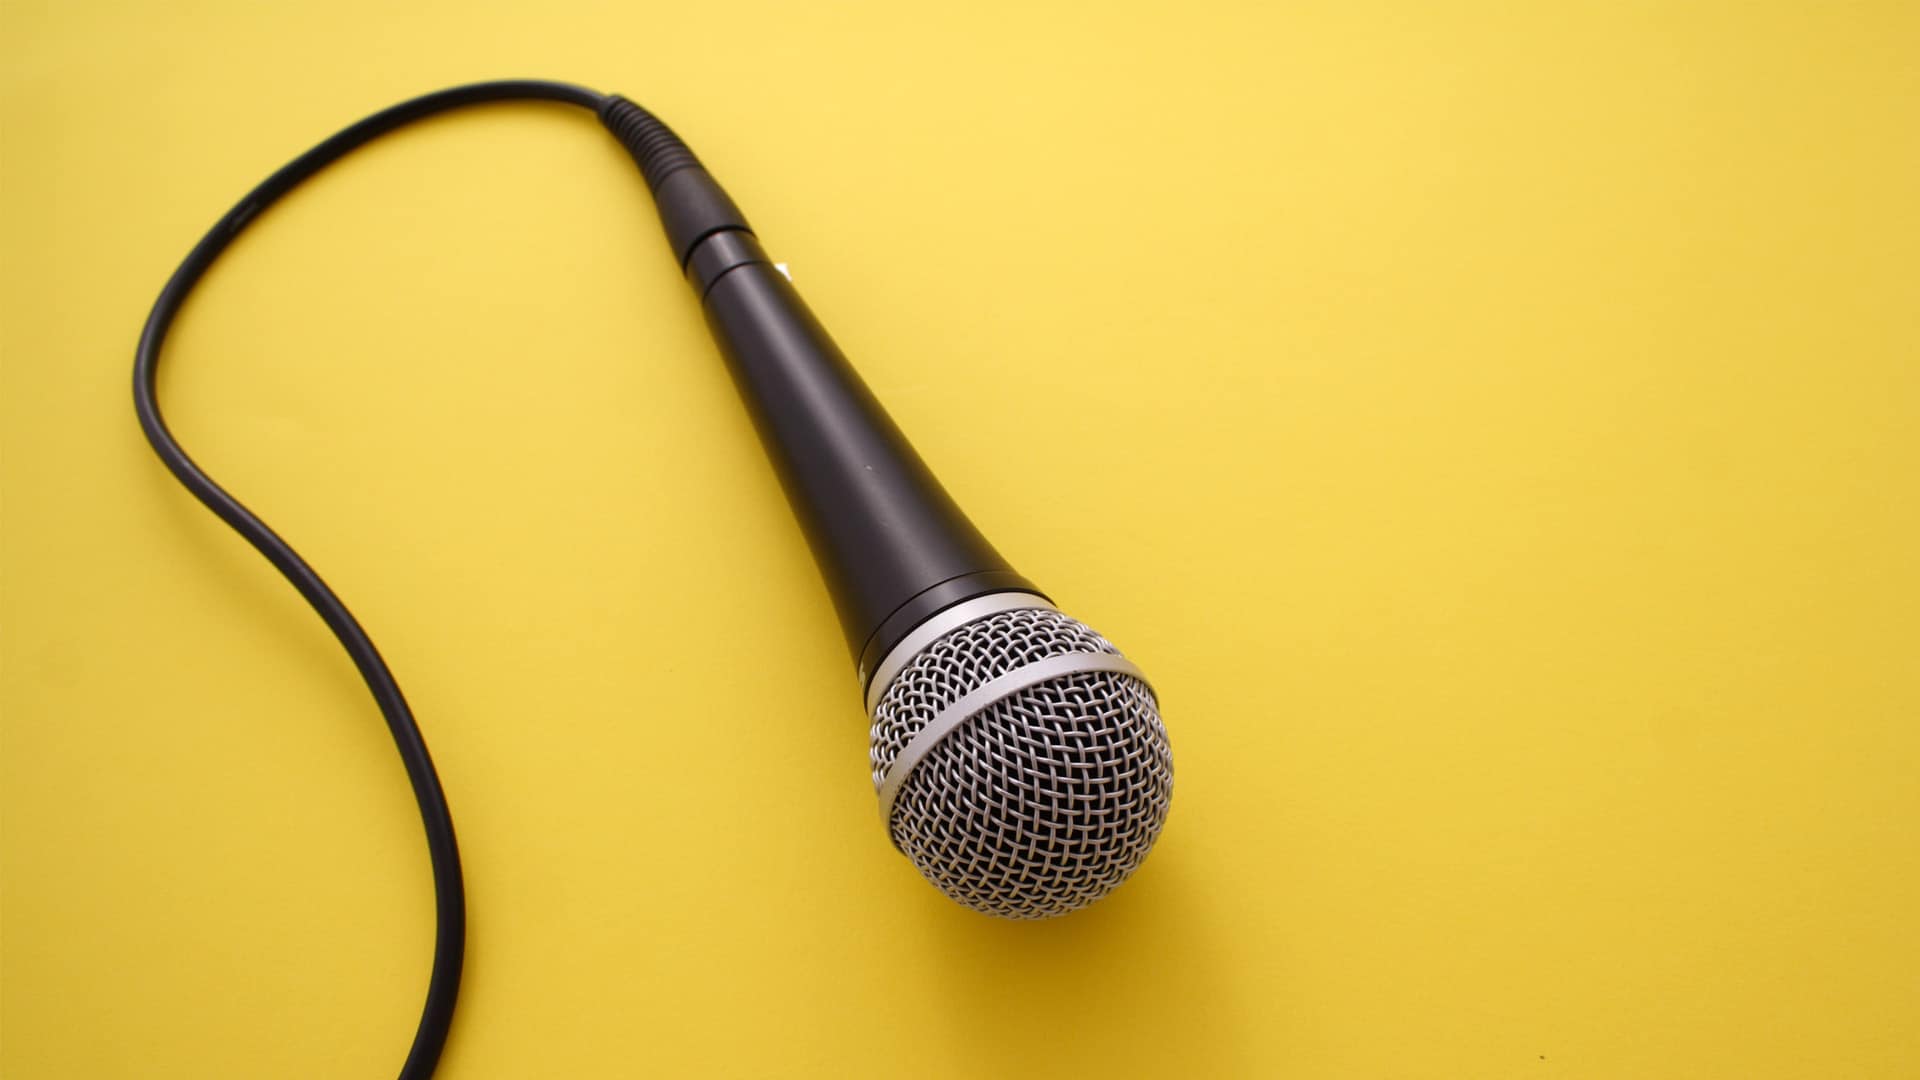 interview microphone on a yellow table